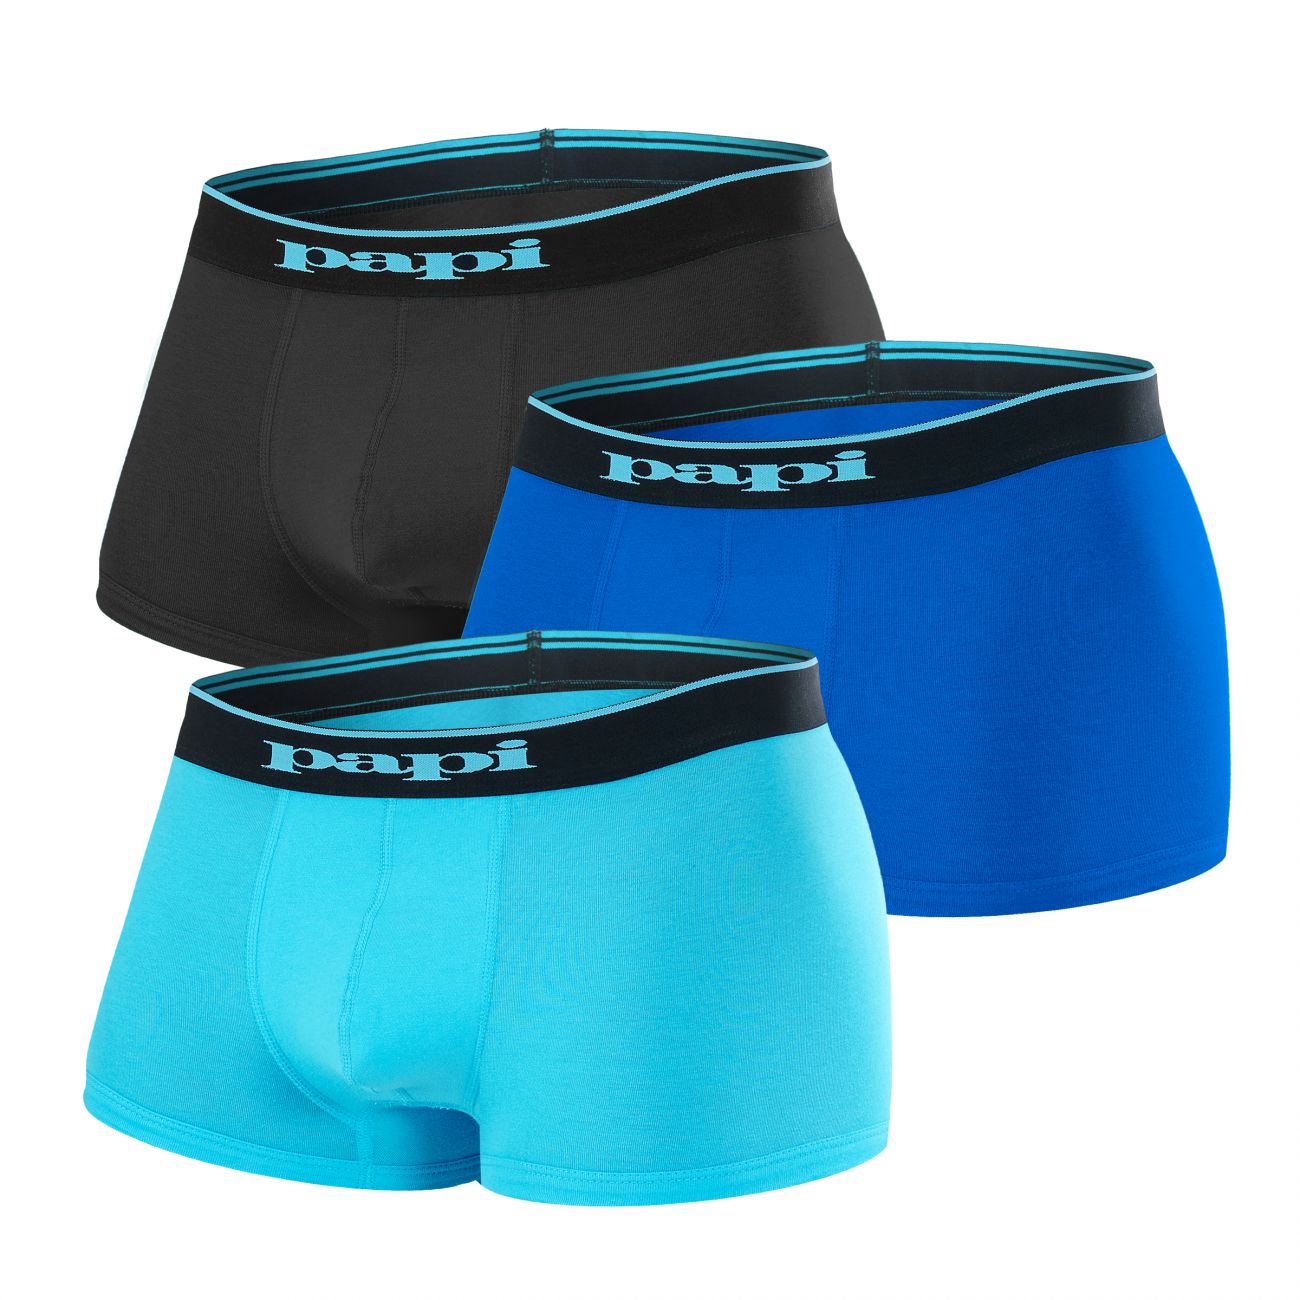 papi Stylish Brazilian Solid and Print Trunks 3-Pack of Men's Underwear,  Black/Turquoise, Small